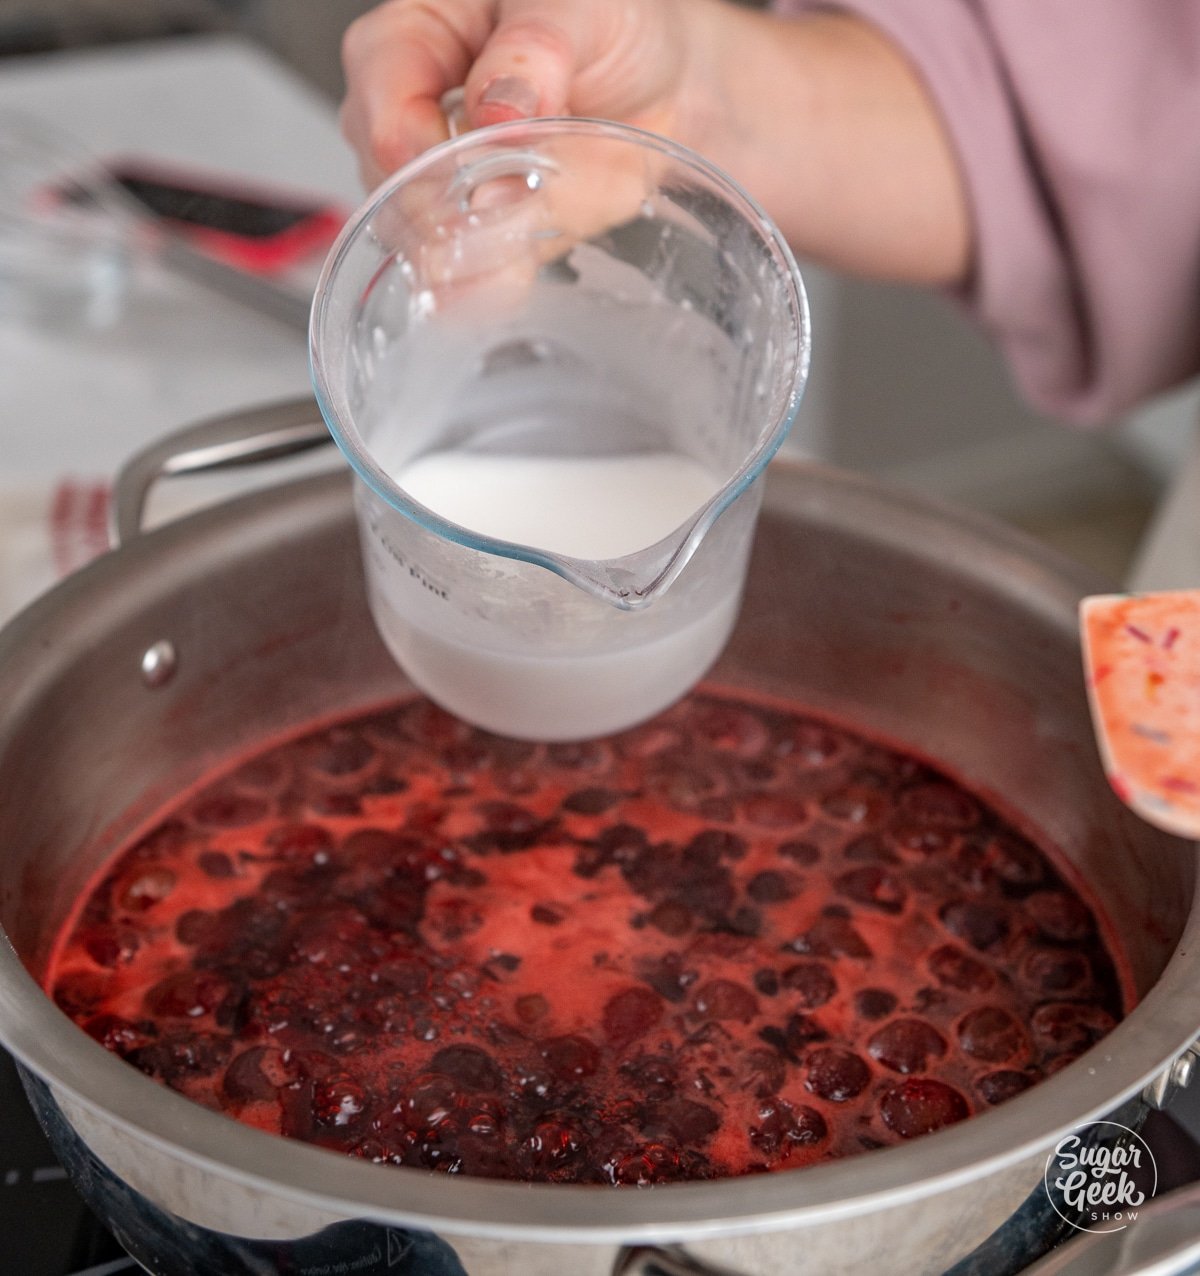 hand adding a measuring cup of cornstarch slurry to cherry filling